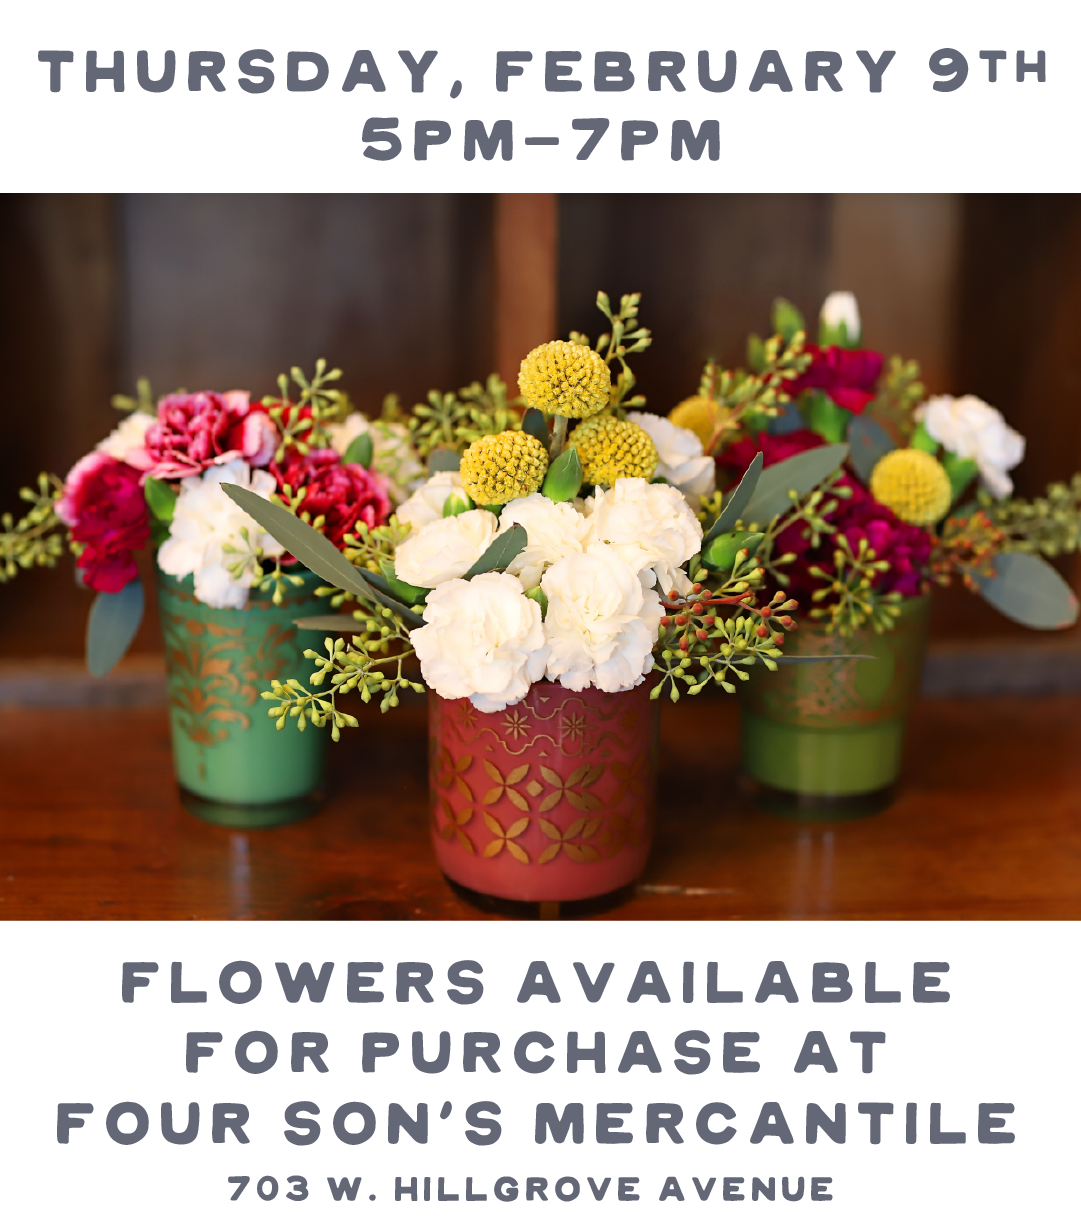 THURSDAY, FEBRUARY 9TH SPM-7PM FLOWERS AVAILABLE FOR PURCHASE AT FOUR SONS MERCANTILE 703 W. HILLGROVE AVENUE 